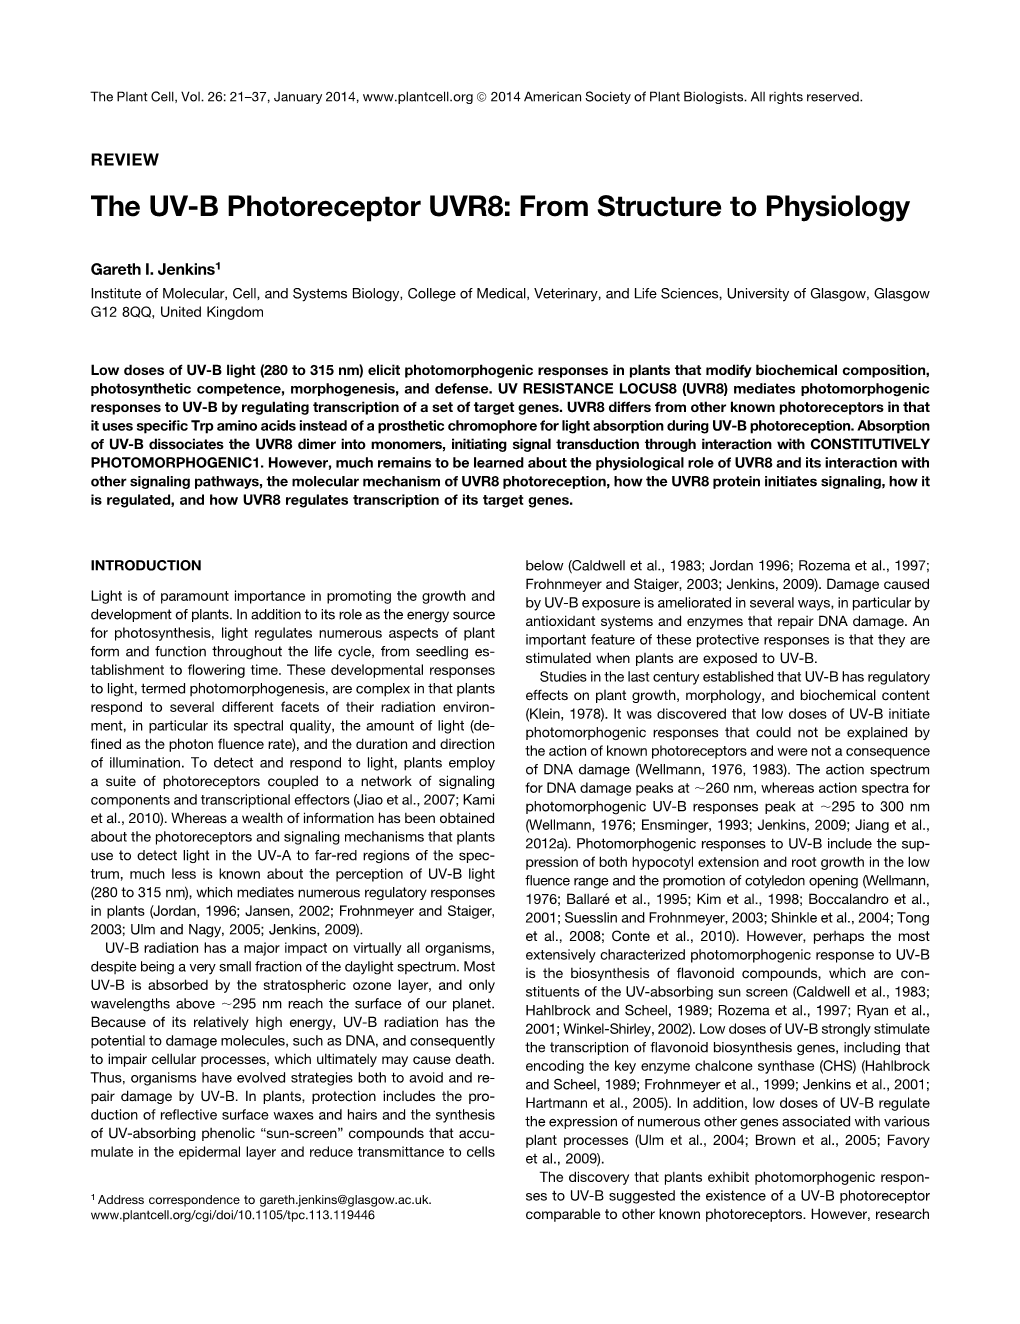 The UV-B Photoreceptor UVR8: from Structure to Physiology